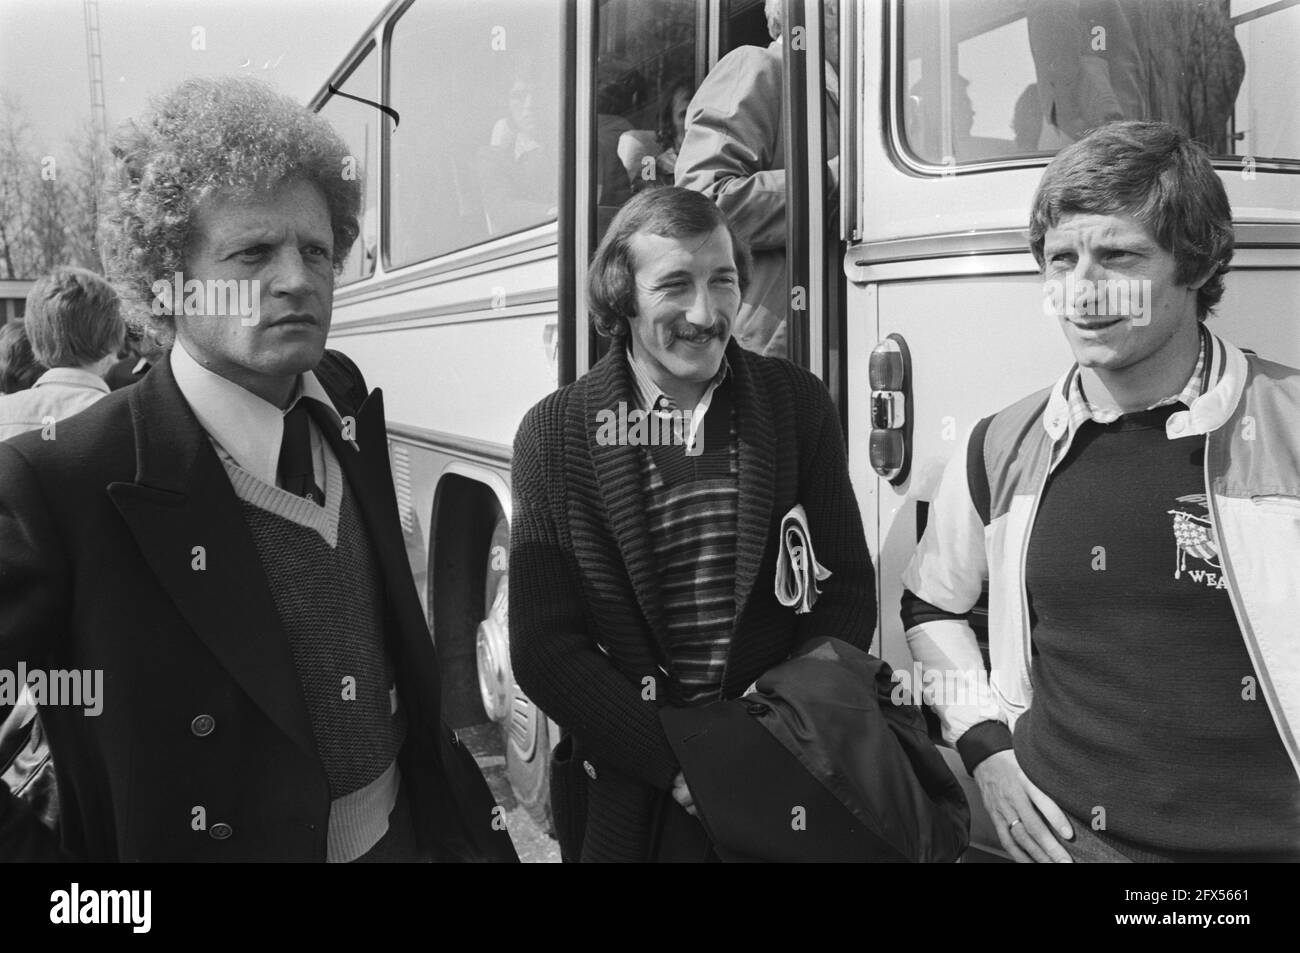 Arrival players St. Etienne at Eindhoven airport from left to right trainer Robert Herbin, Patrick Revelli and goal scorer Jean.Michel Larqué, April 13, 1976, sports, soccer, soccer players, The Netherlands, 20th century press agency photo, news to remember, documentary, historic photography 1945-1990, visual stories, human history of the Twentieth Century, capturing moments in time Stock Photo